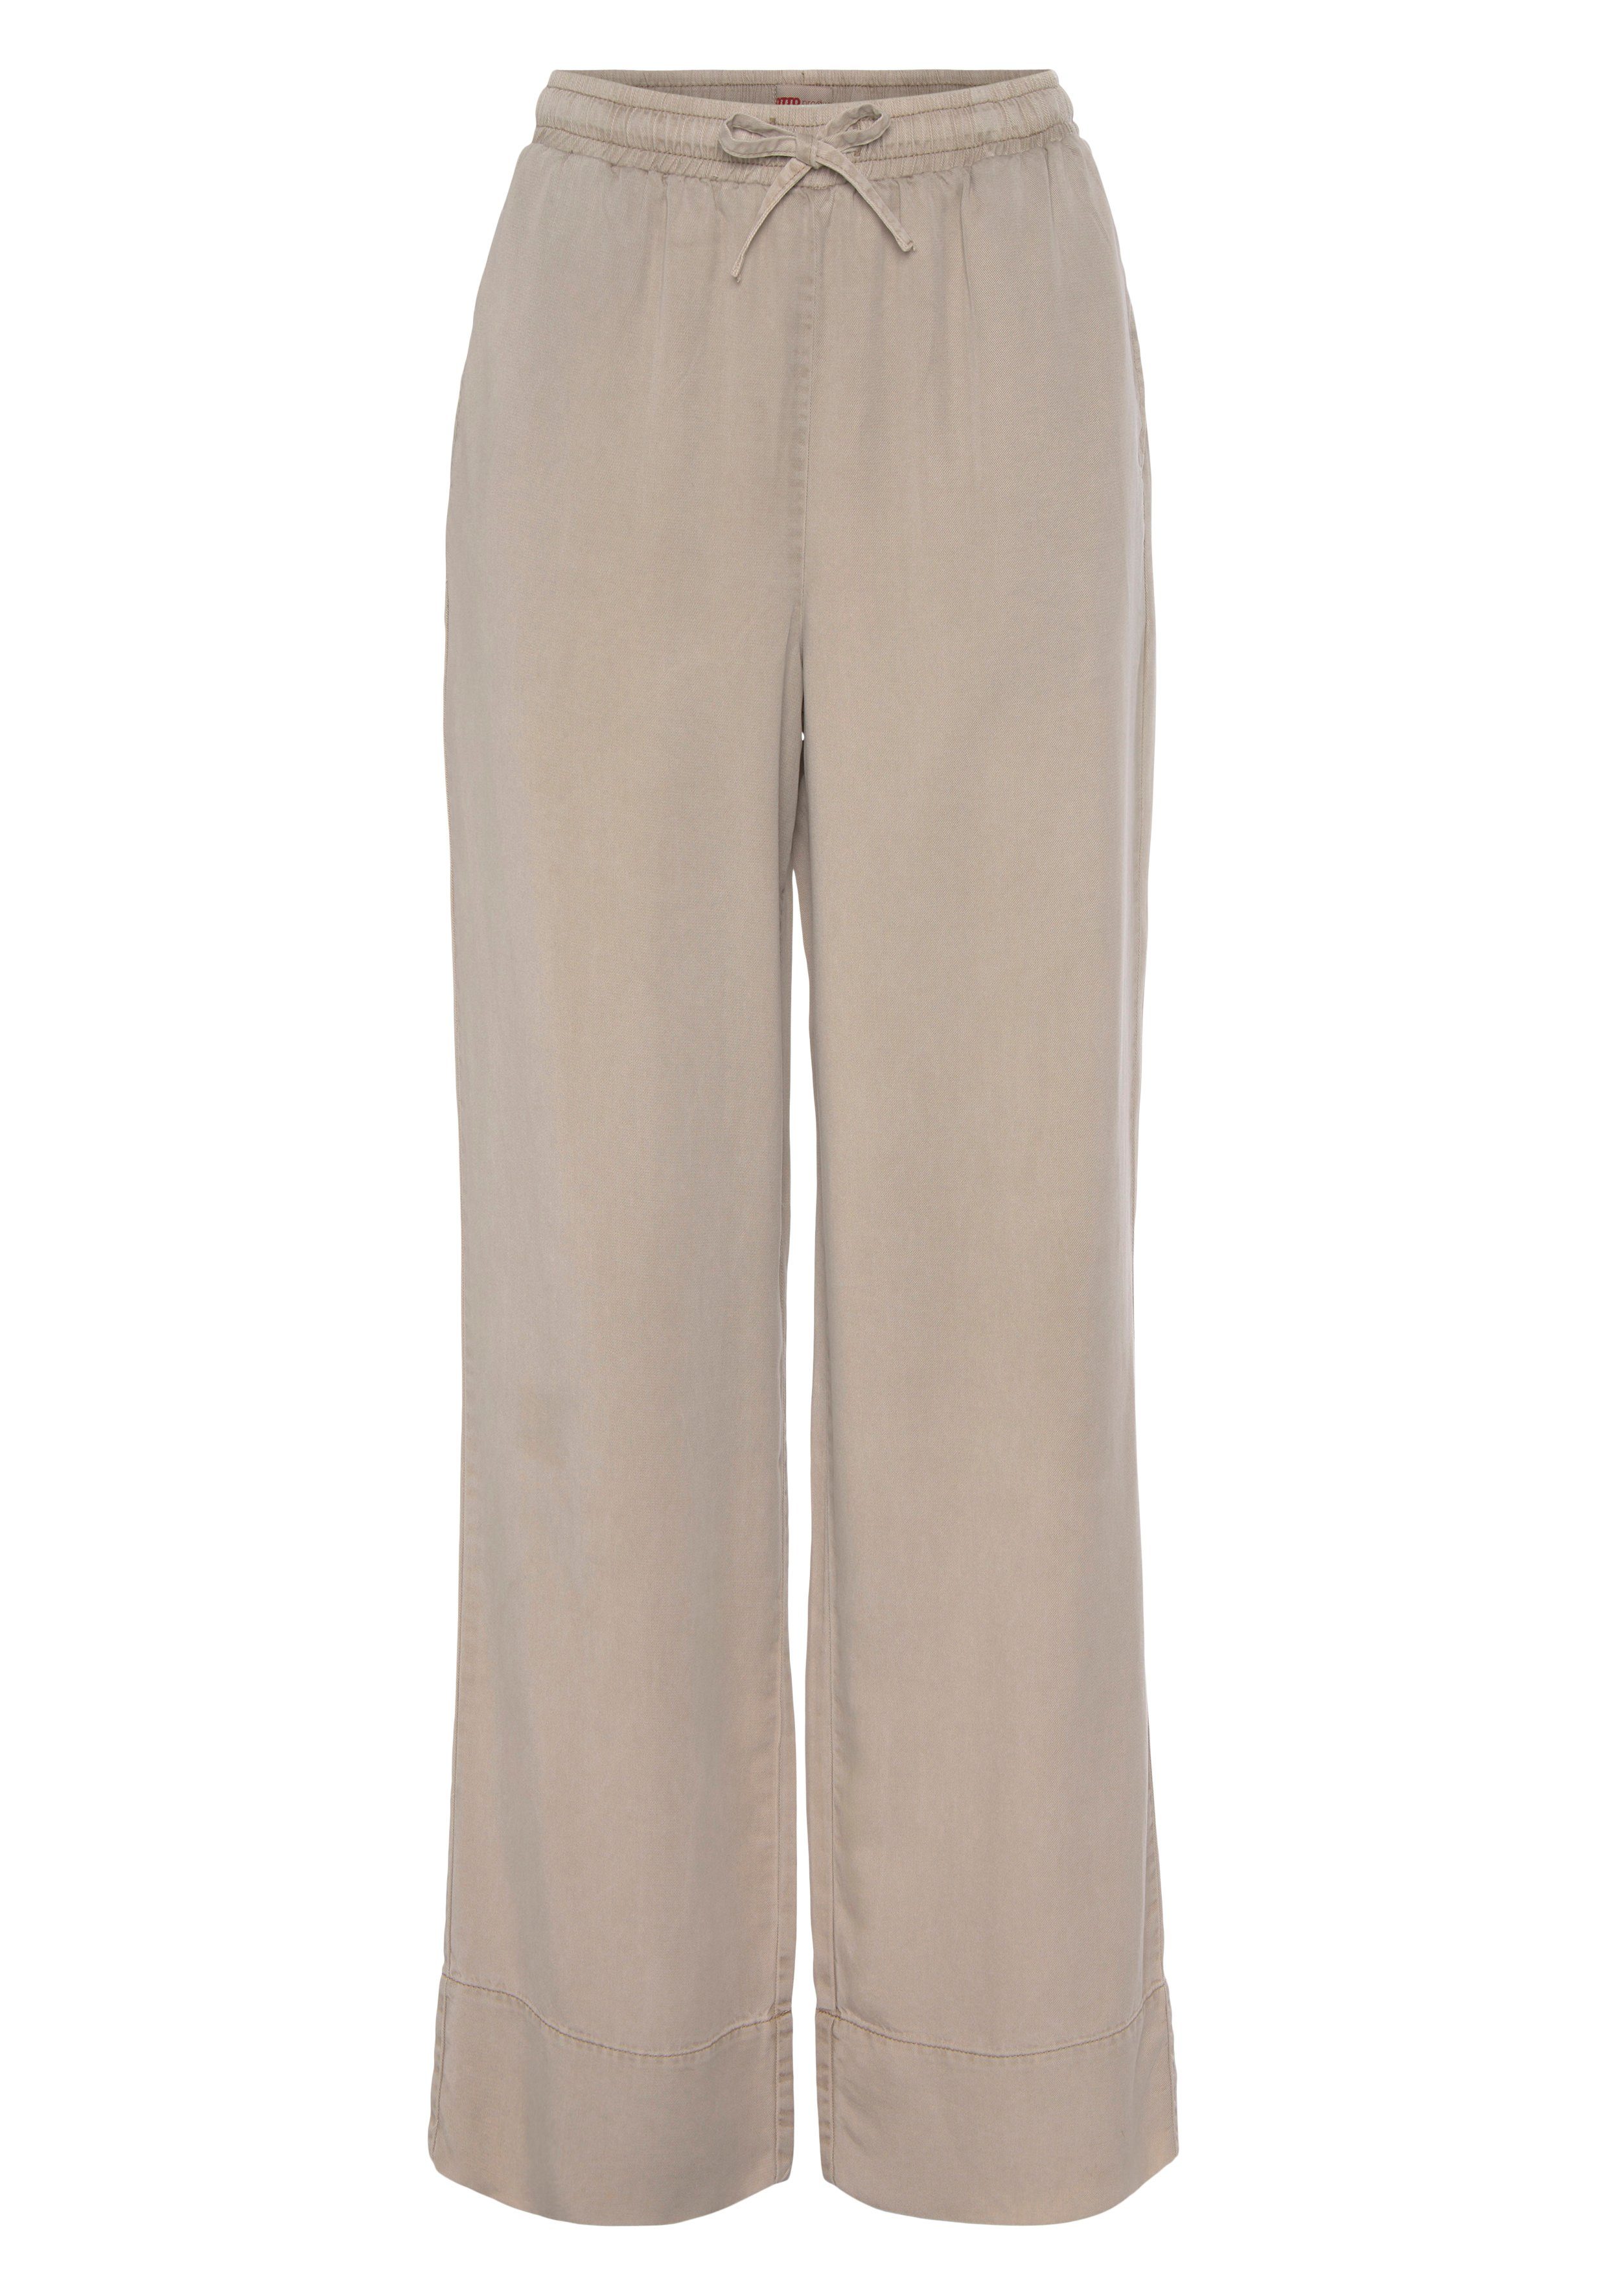 OTTO Marlene-Hose COLLECTION products beige CIRCULAR